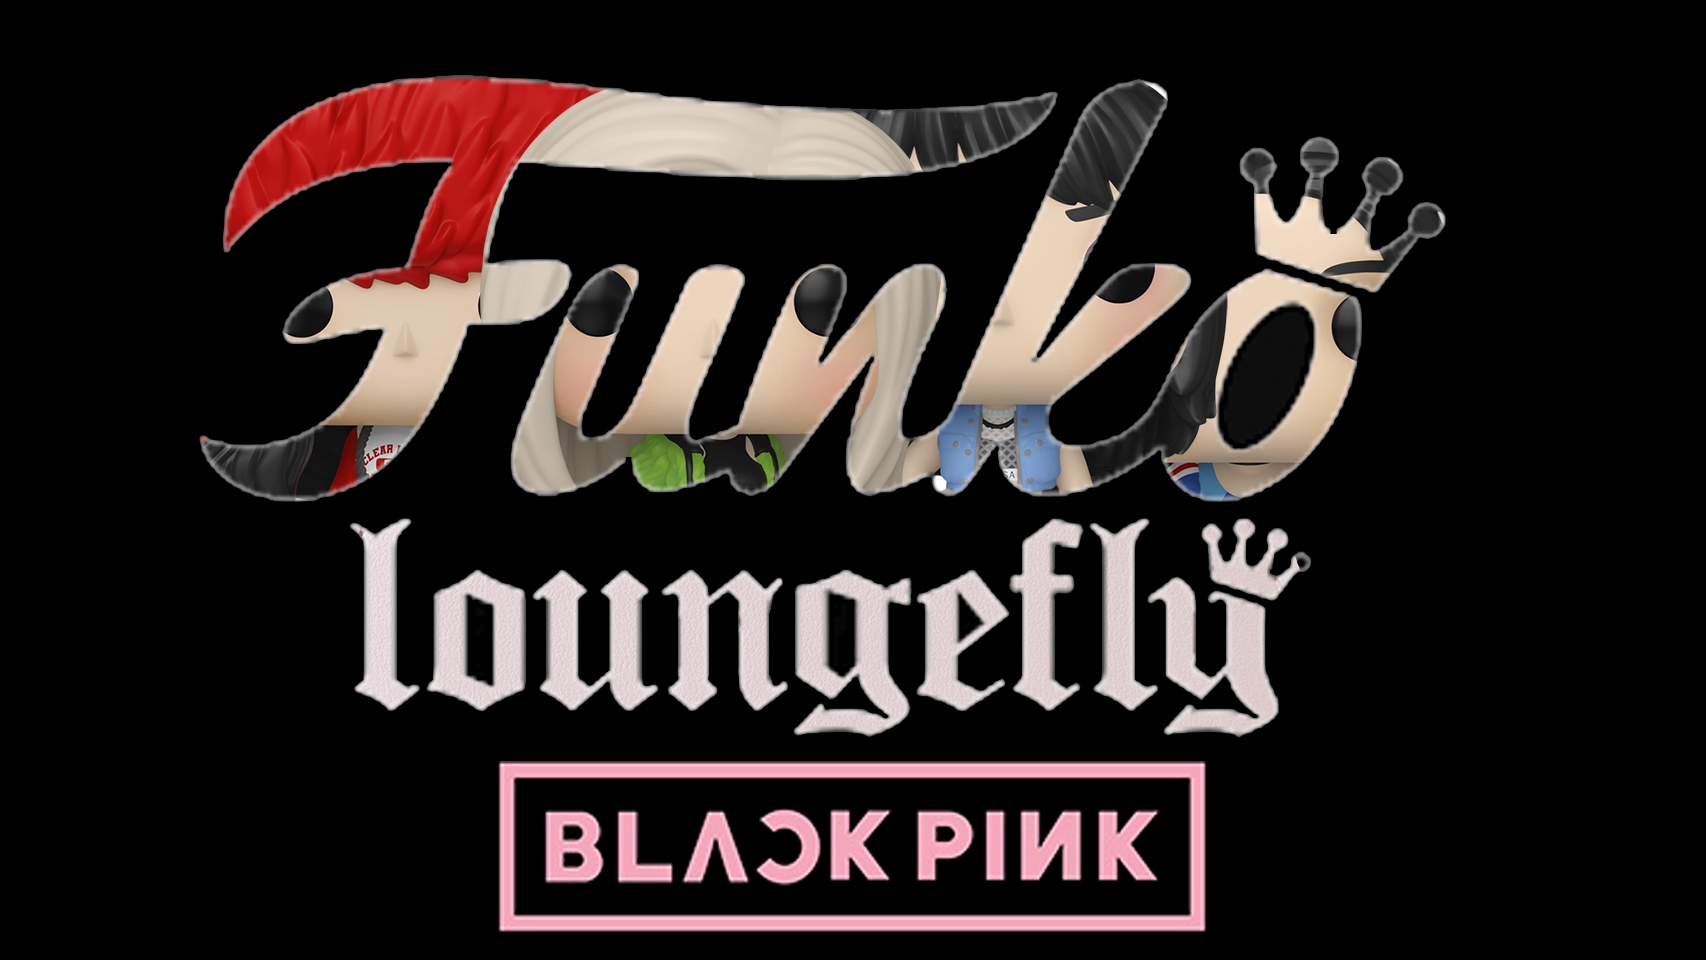 BLACKPINK Joins Forces with Loungefly and Funko for a Glorious New BLɅϽKPIИK Collection